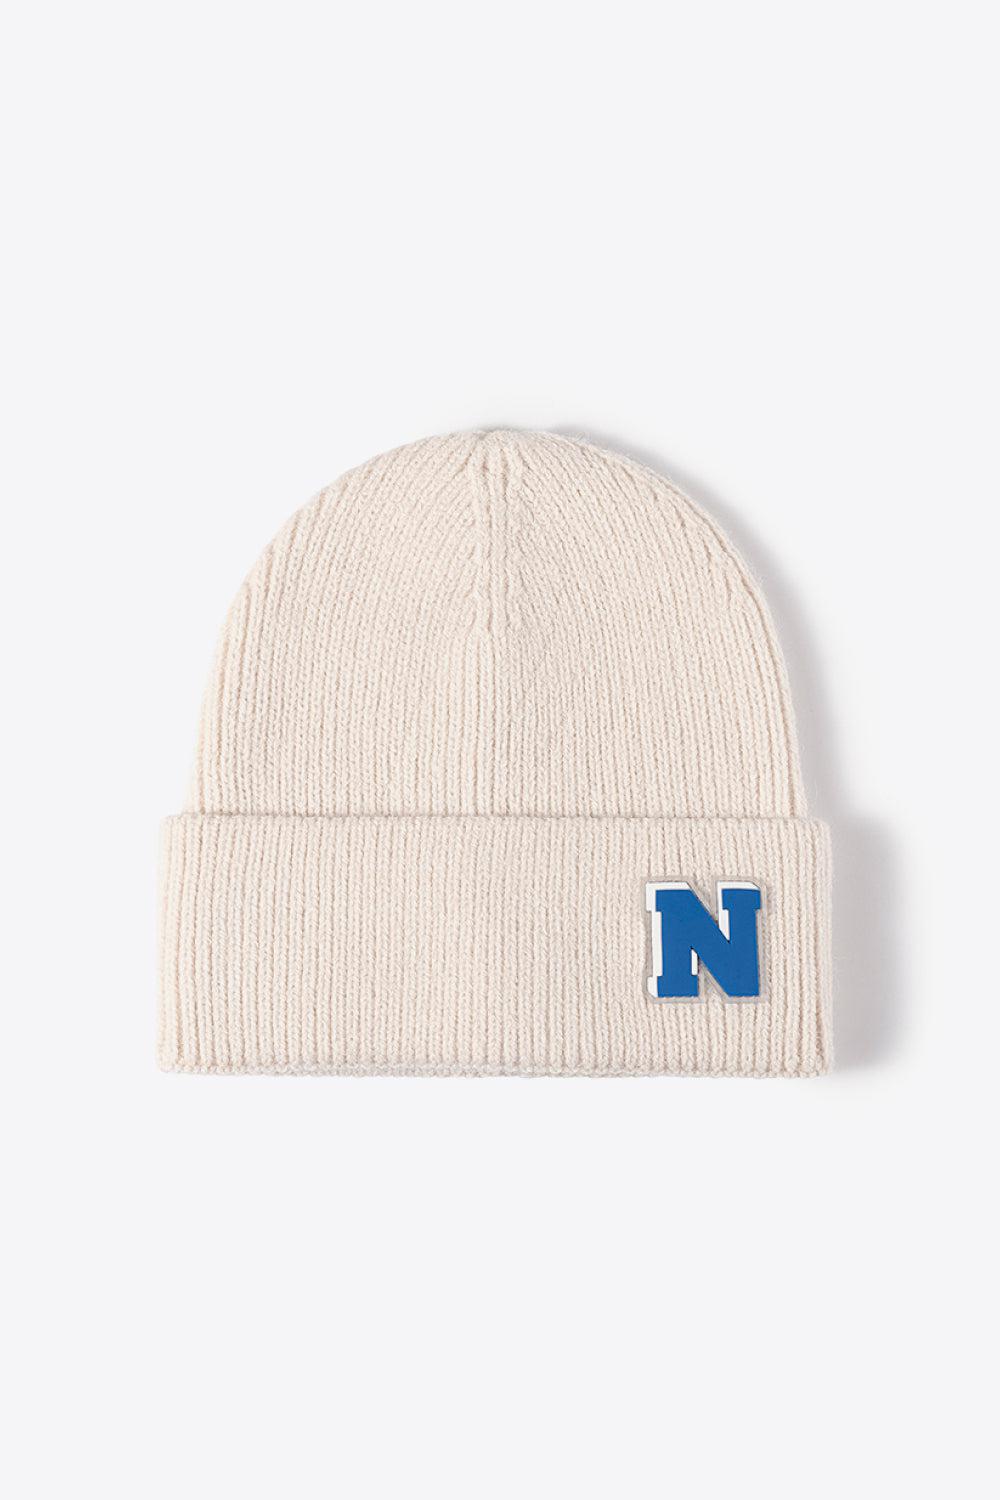 Letter N Patch Cuffed Knit Beanie BLUE ZONE PLANET